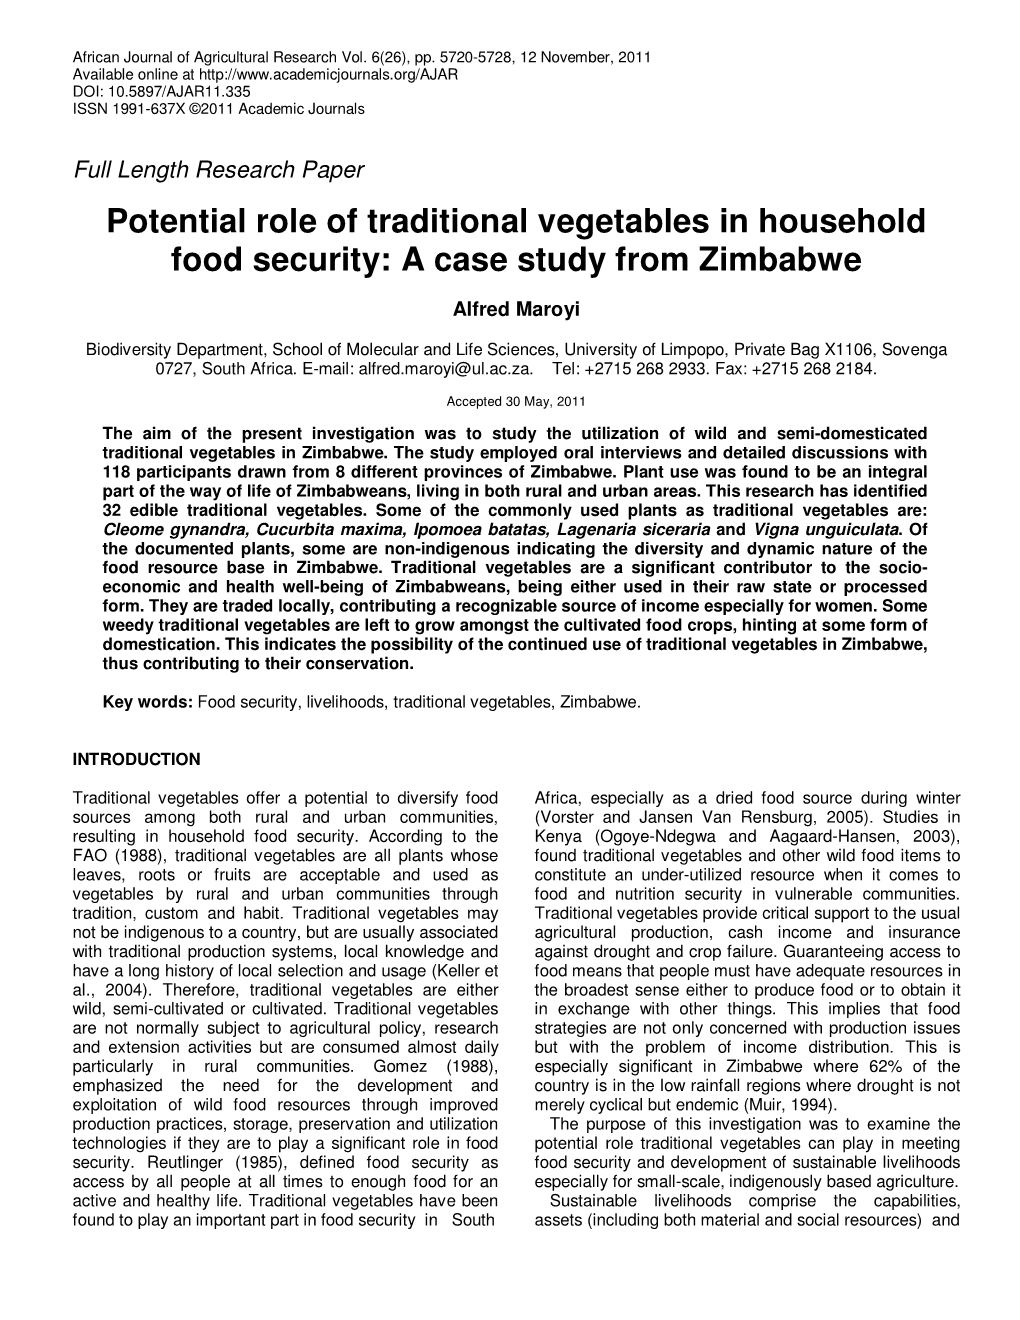 Potential Role of Traditional Vegetables in Household Food Security: a Case Study from Zimbabwe